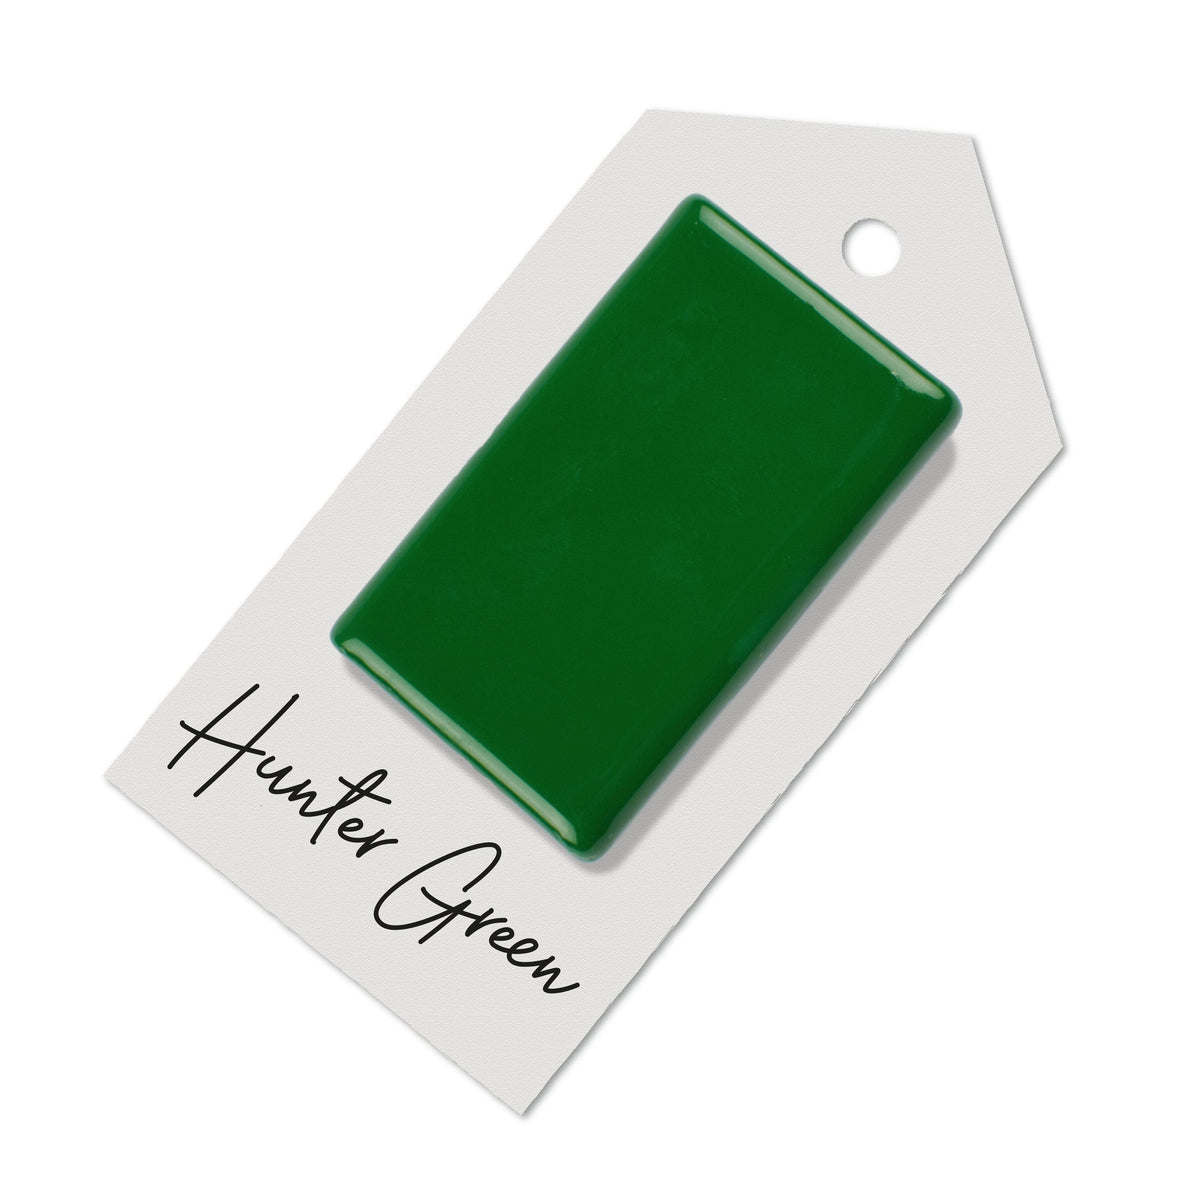 Hunter Green sample for Aga range cooker re-enamelling &amp; reconditioned cookers